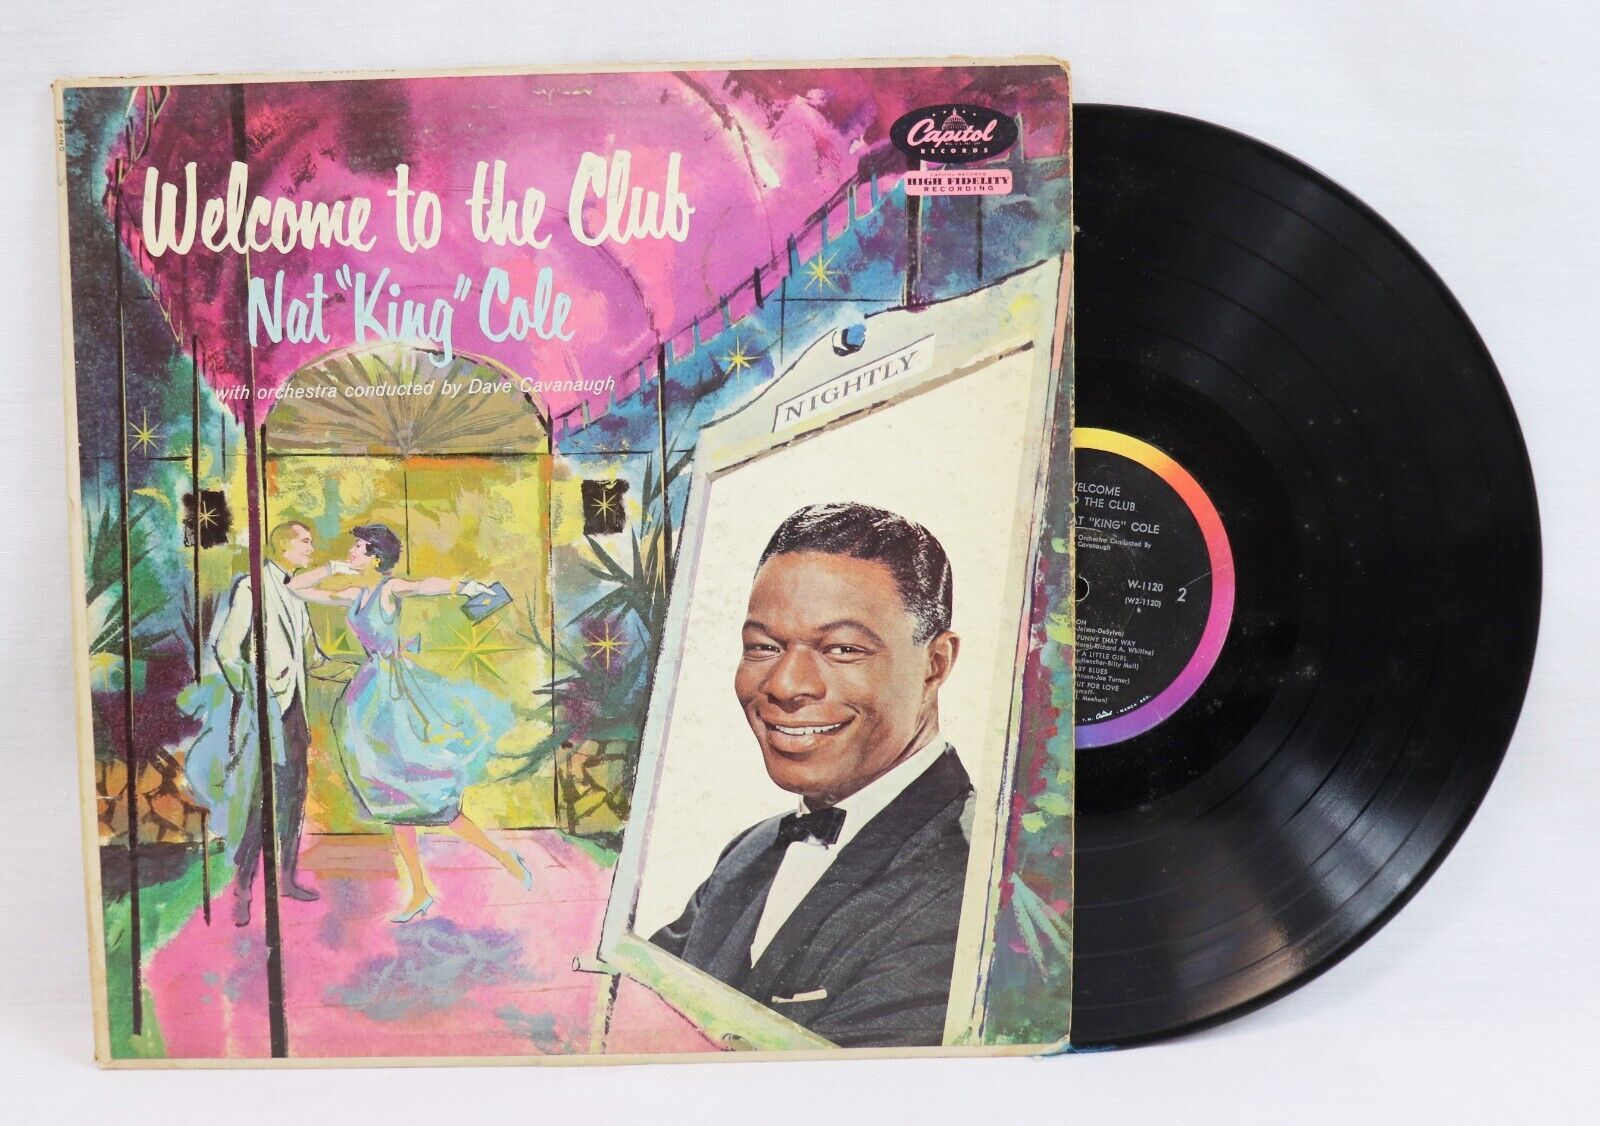 Primary image for VINTAGE Nat King Cole Welcome to the Club LP Vinyl Record Album W1120